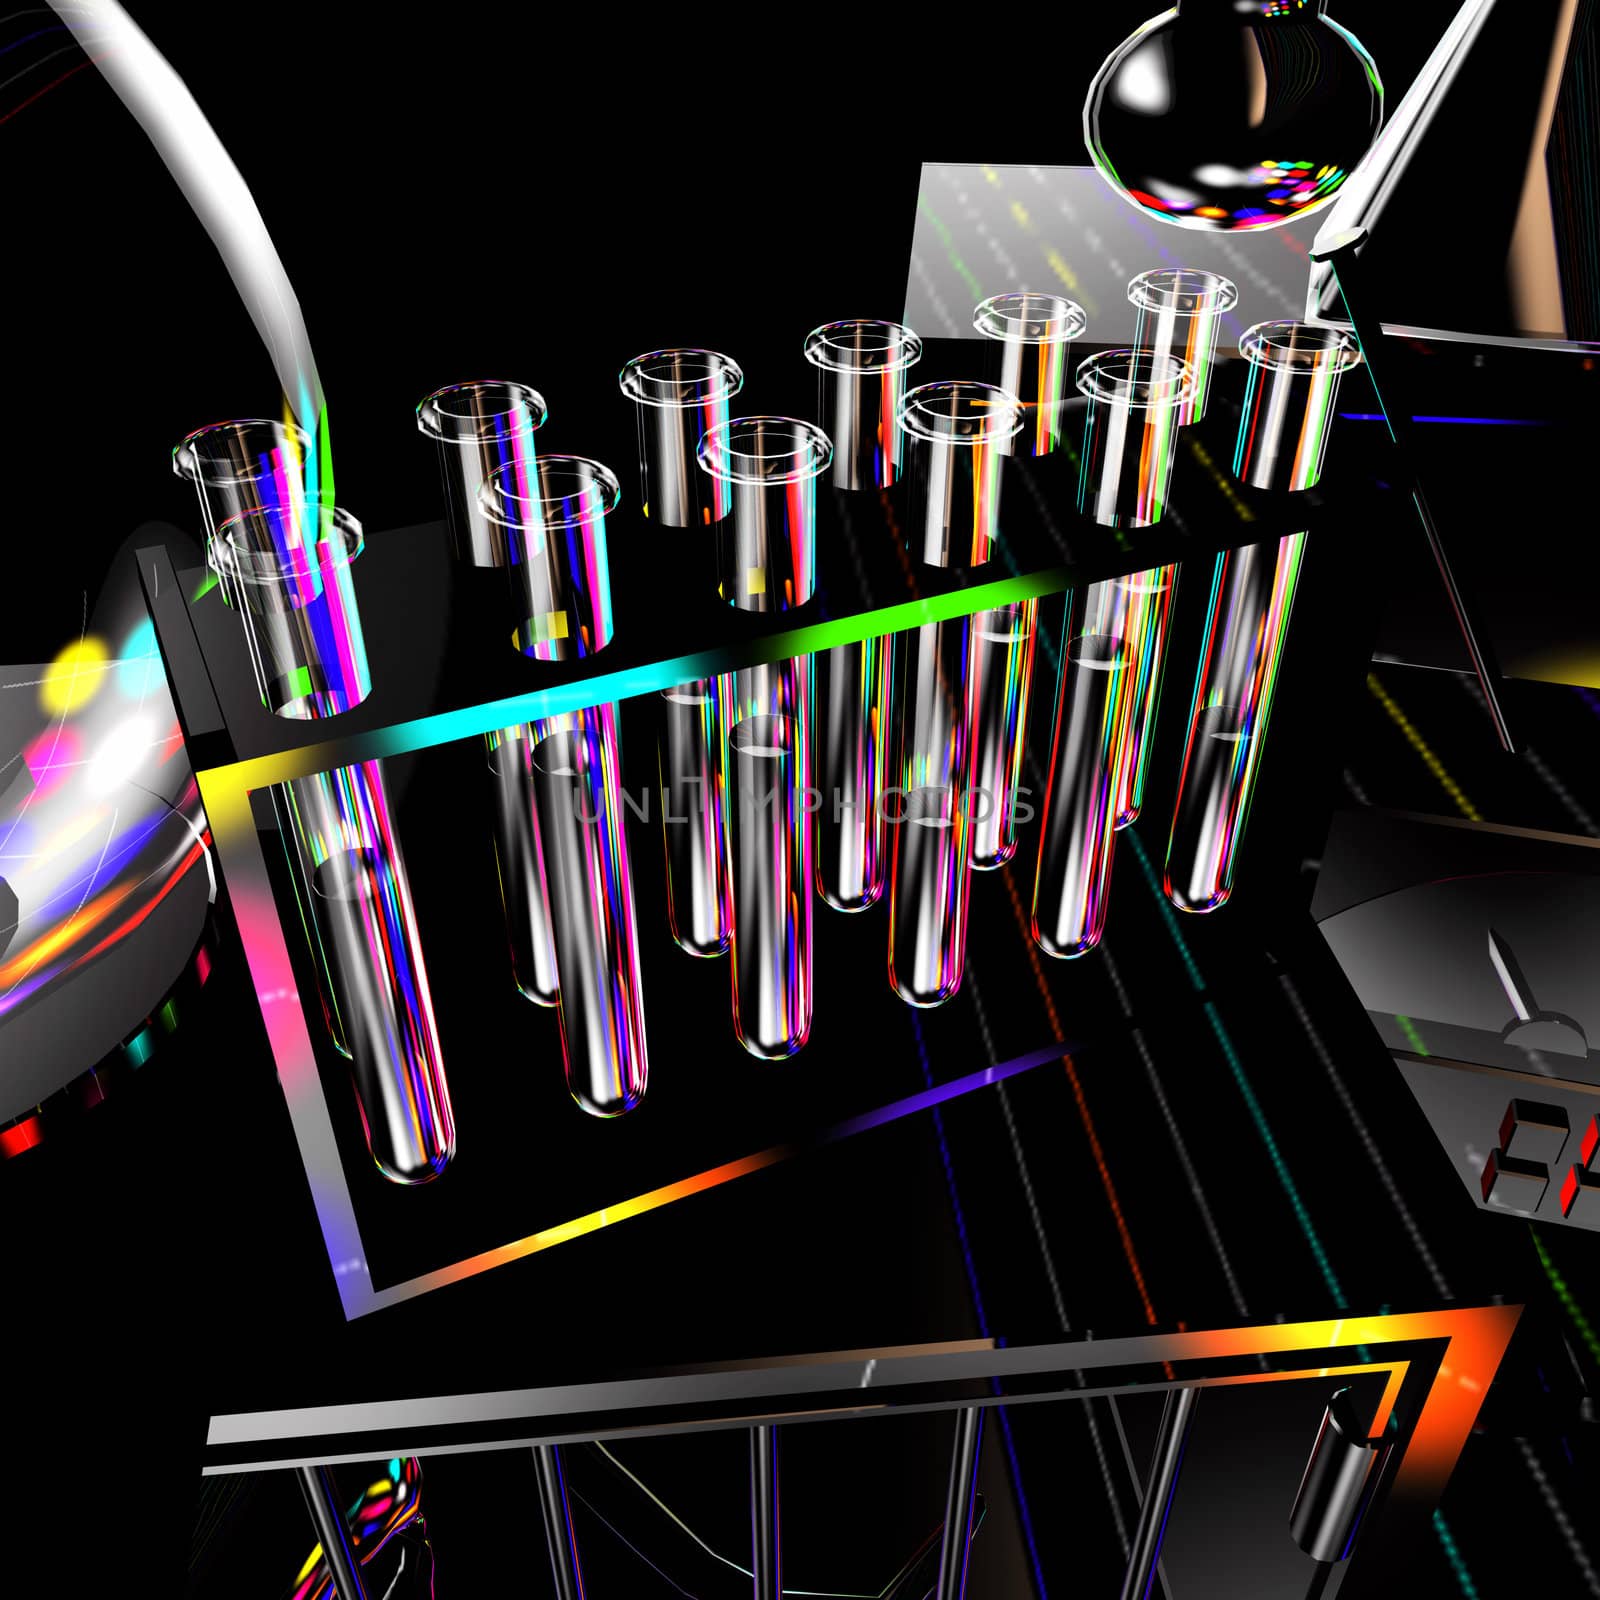 Science background with test tubes by andromeda13